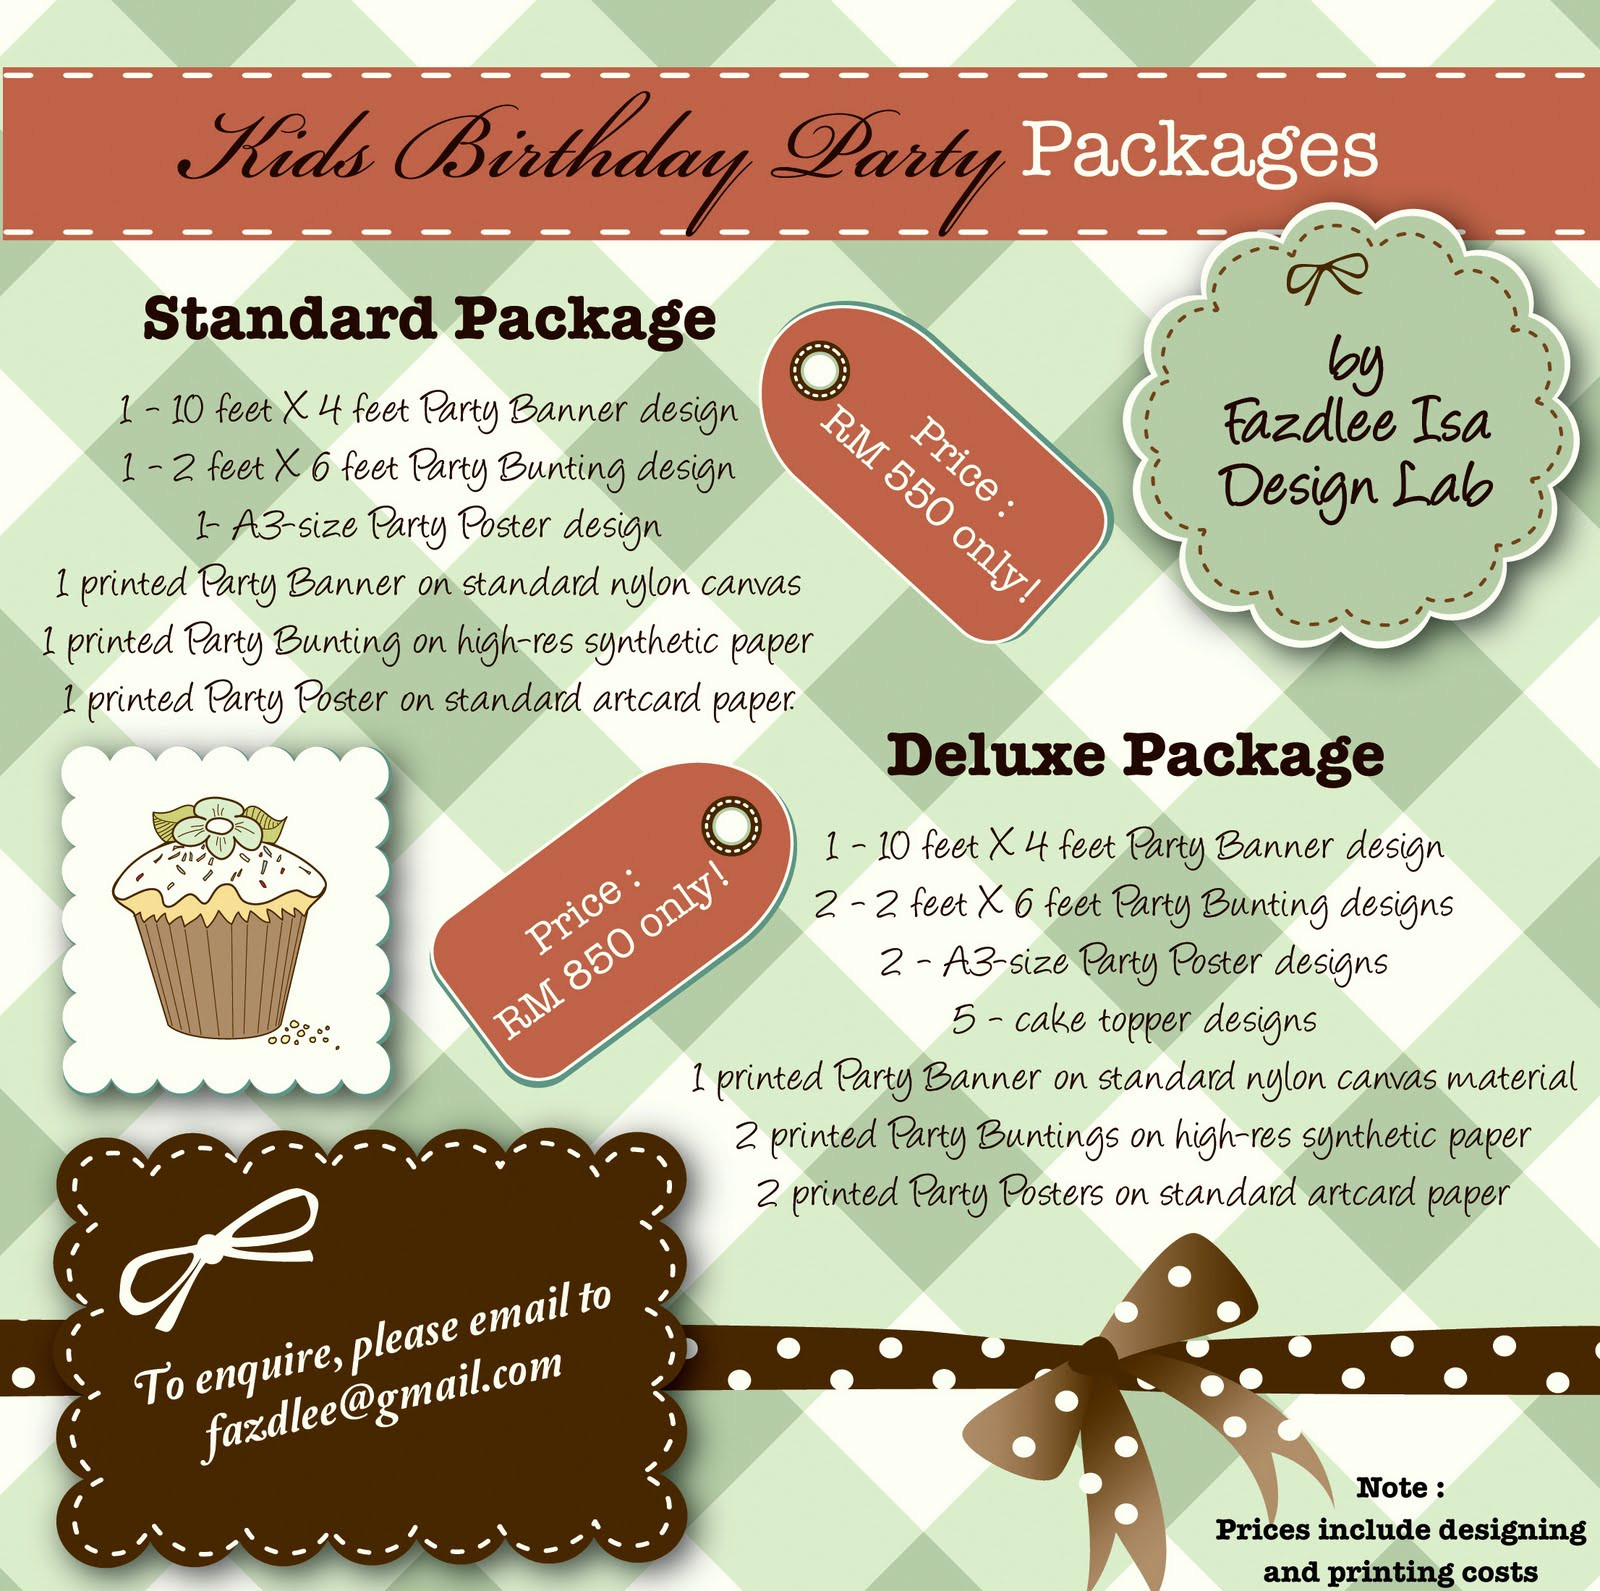 Kids Birthday Party Packages
 Fazdlee Isa Design Lab Kids Birthday Party Packages